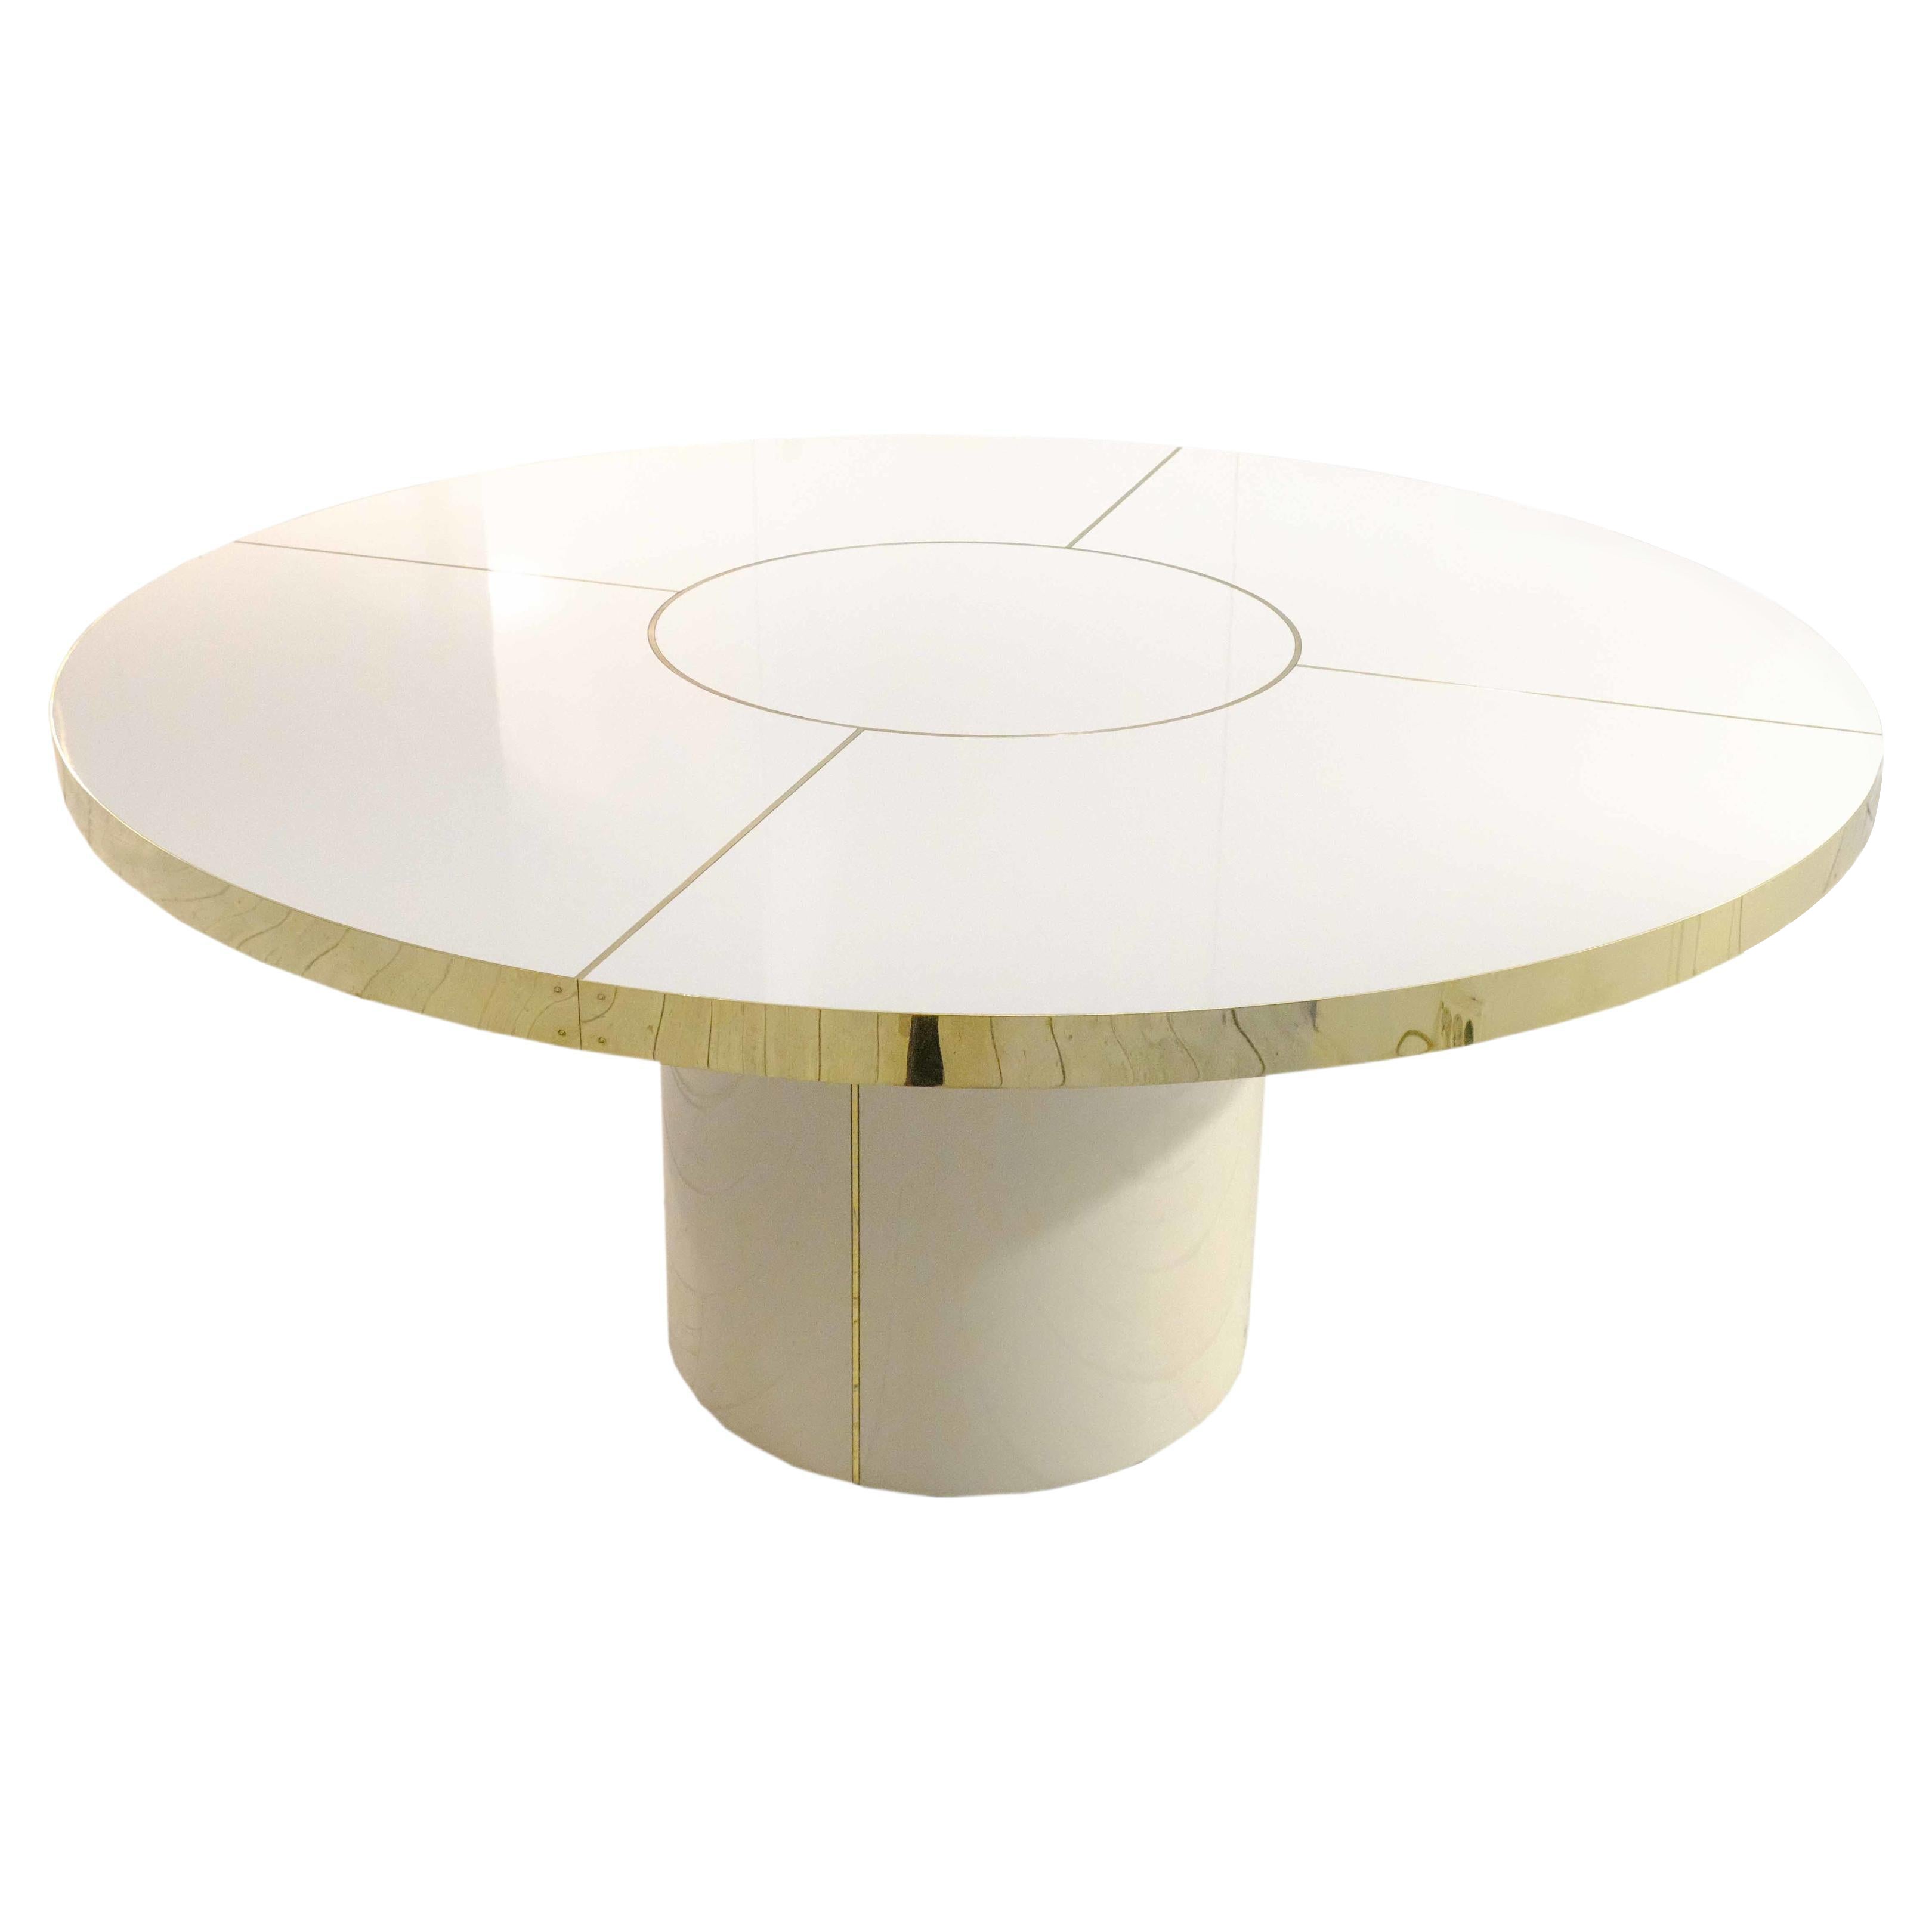 Retro Design Round Dining Table Palm Springs Style High Gloss Laminated & Brass Details and with contrasting Navy - Night Sea pedestal Leg - M Size

Discover our incredible collection of retro-style design tables inspired by the iconic decoration of